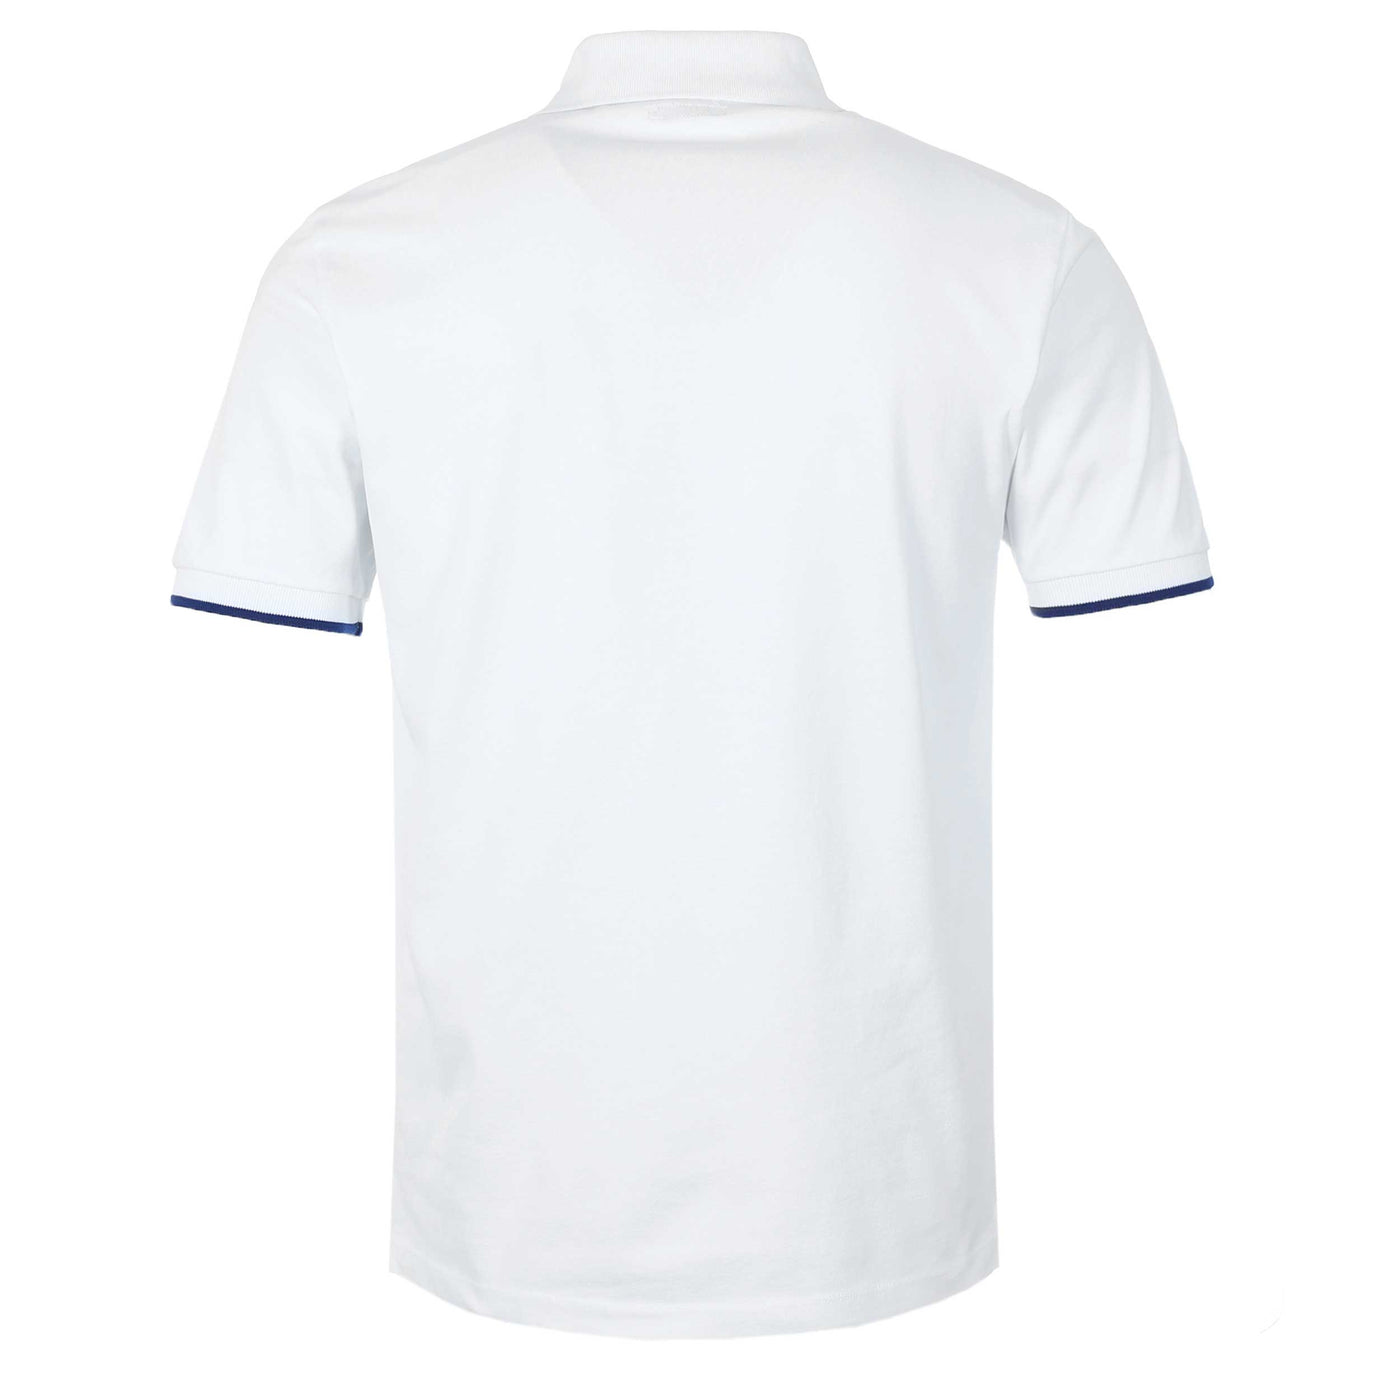 Jacob Cohen Tipped Polo Shirt in White Back